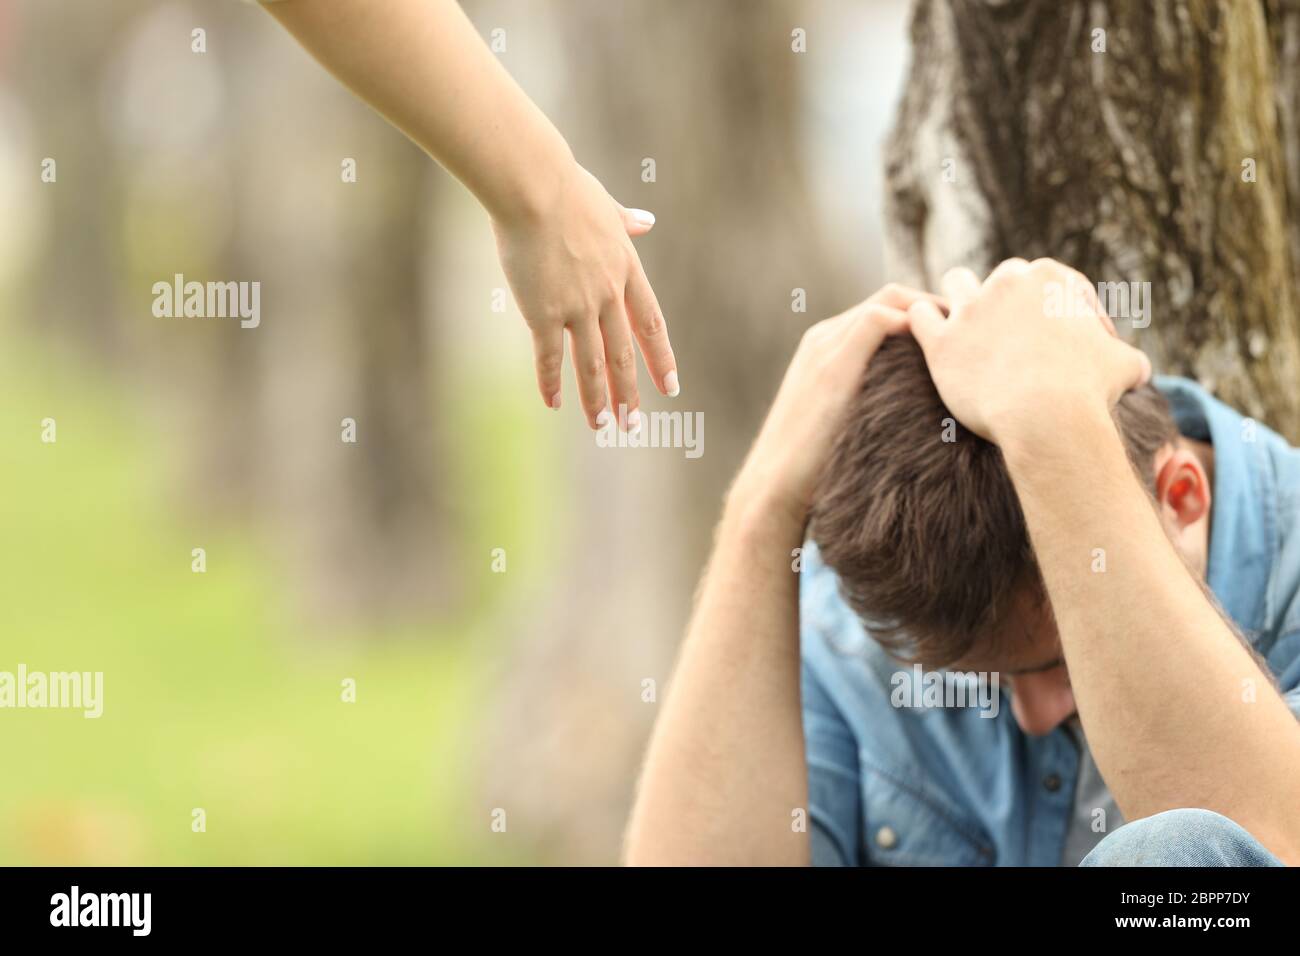 Sad teen sitting on the grass in a park and a woman hand offering help with a green background Stock Photo